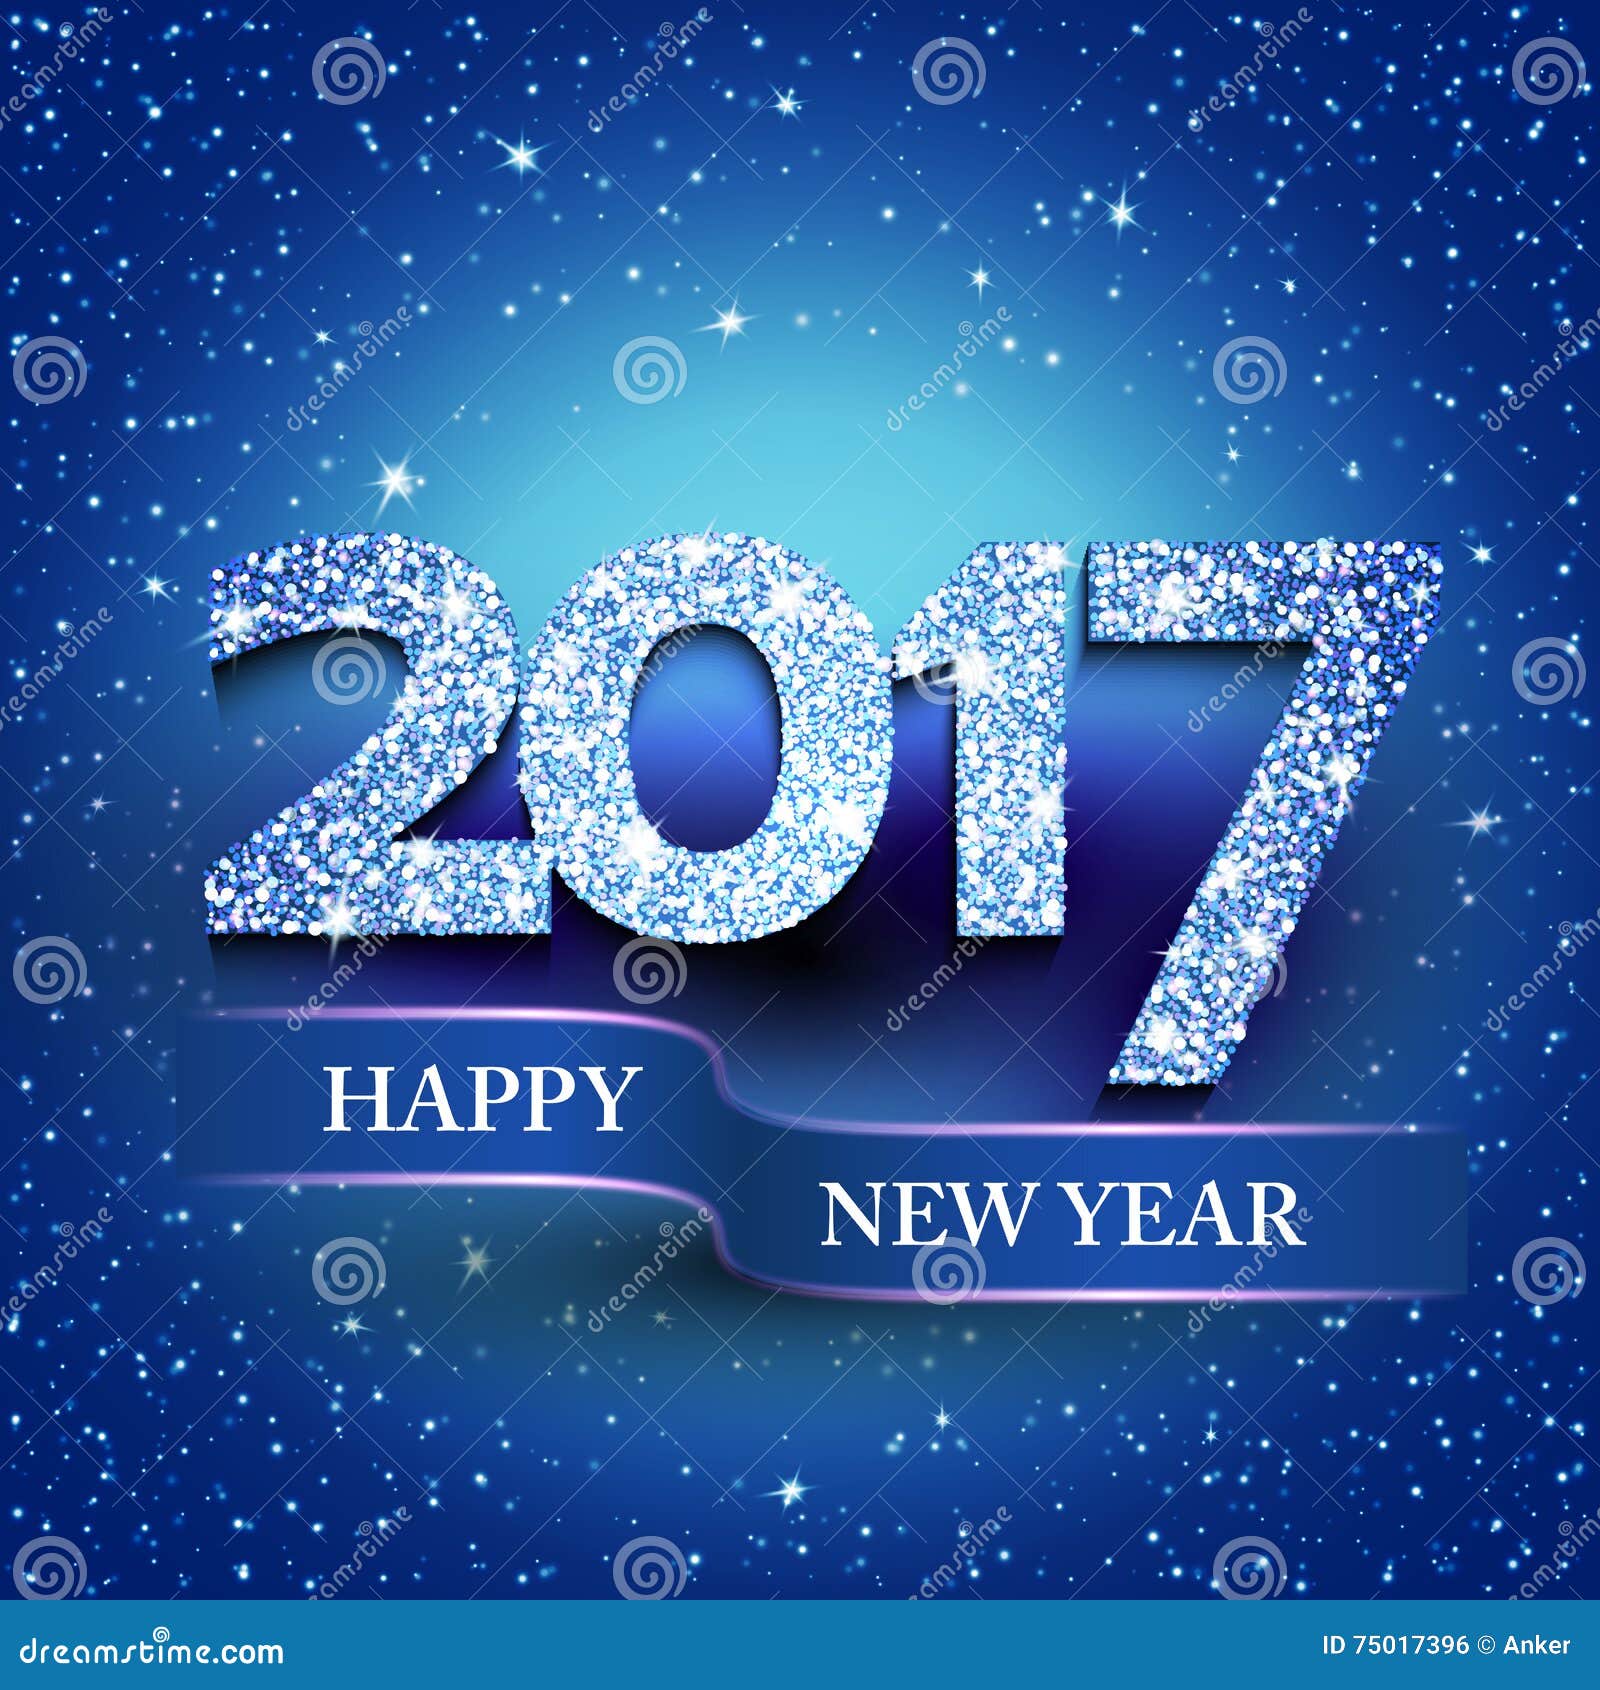 Beautiful purple background for 2017 new year Vector Image